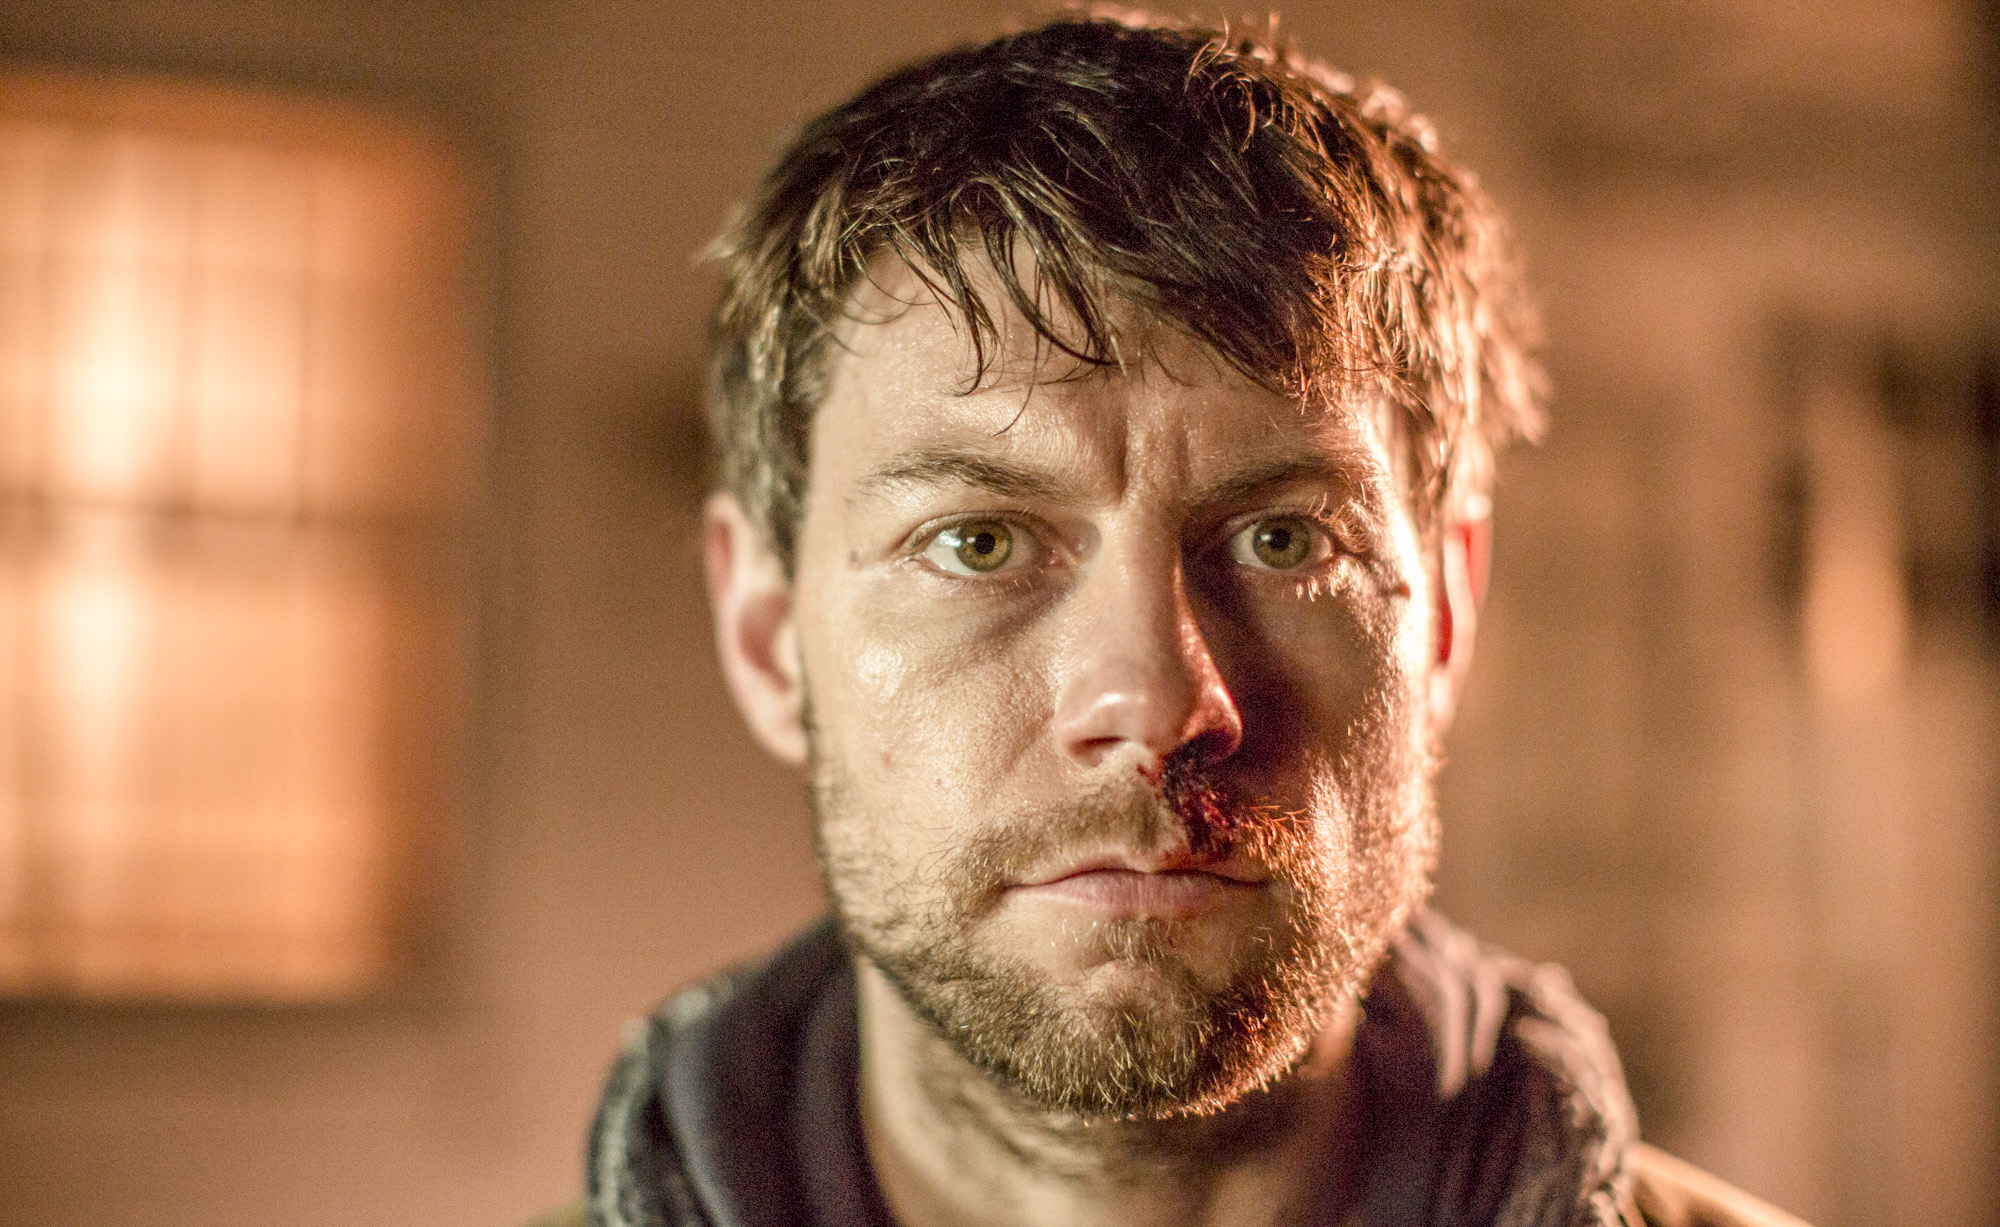 Patrick Fugit in the pilot of Outcast